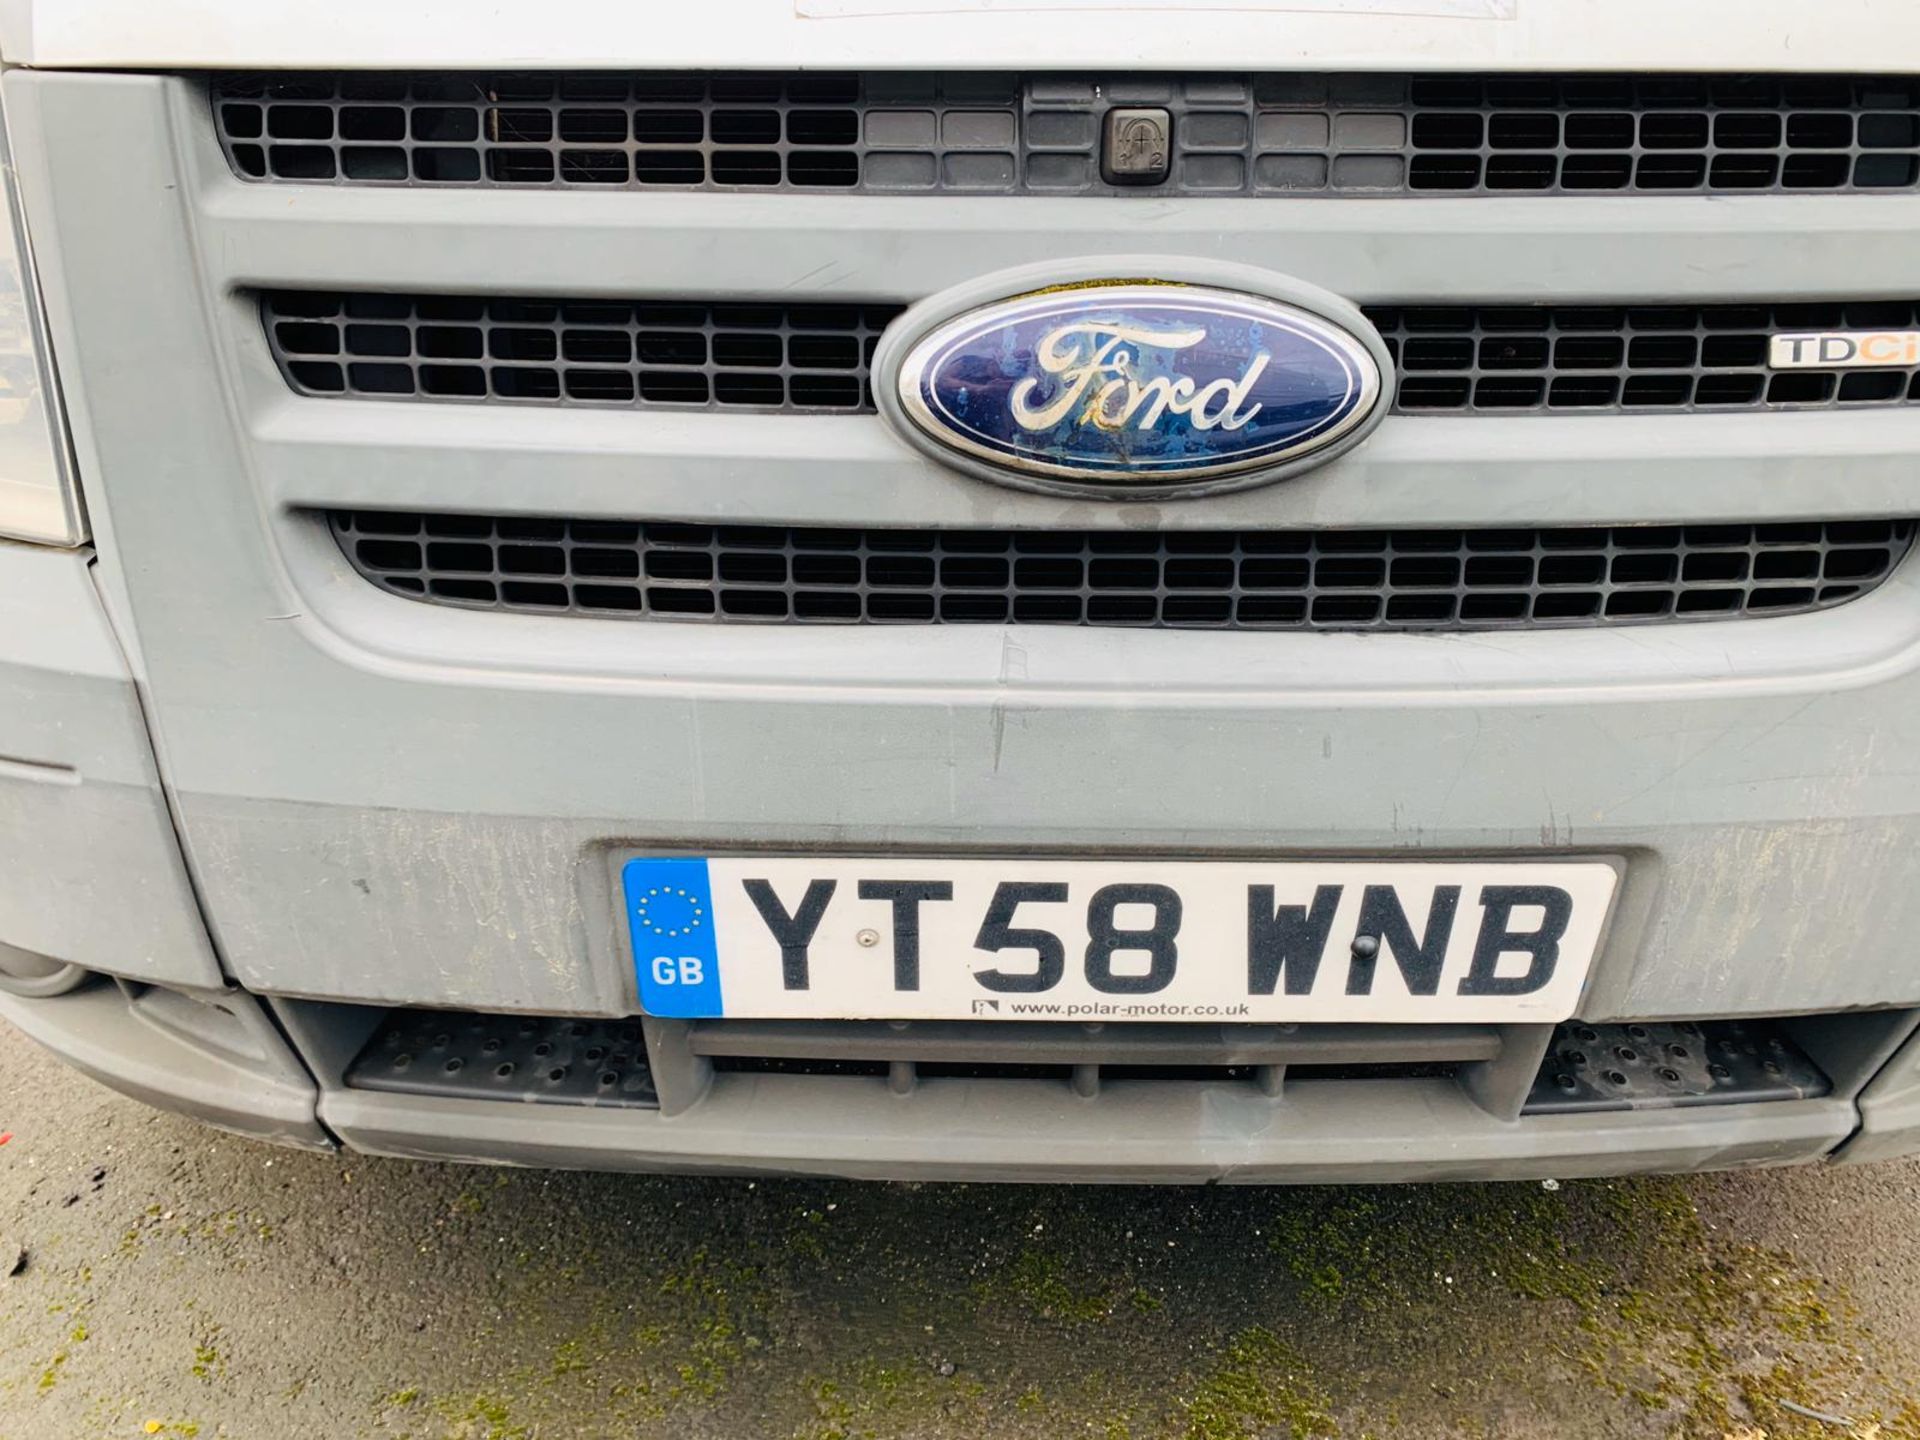 ENTRY DIRECT FROM LOCAL AUTHORITY Ford Transit Van - Image 7 of 25